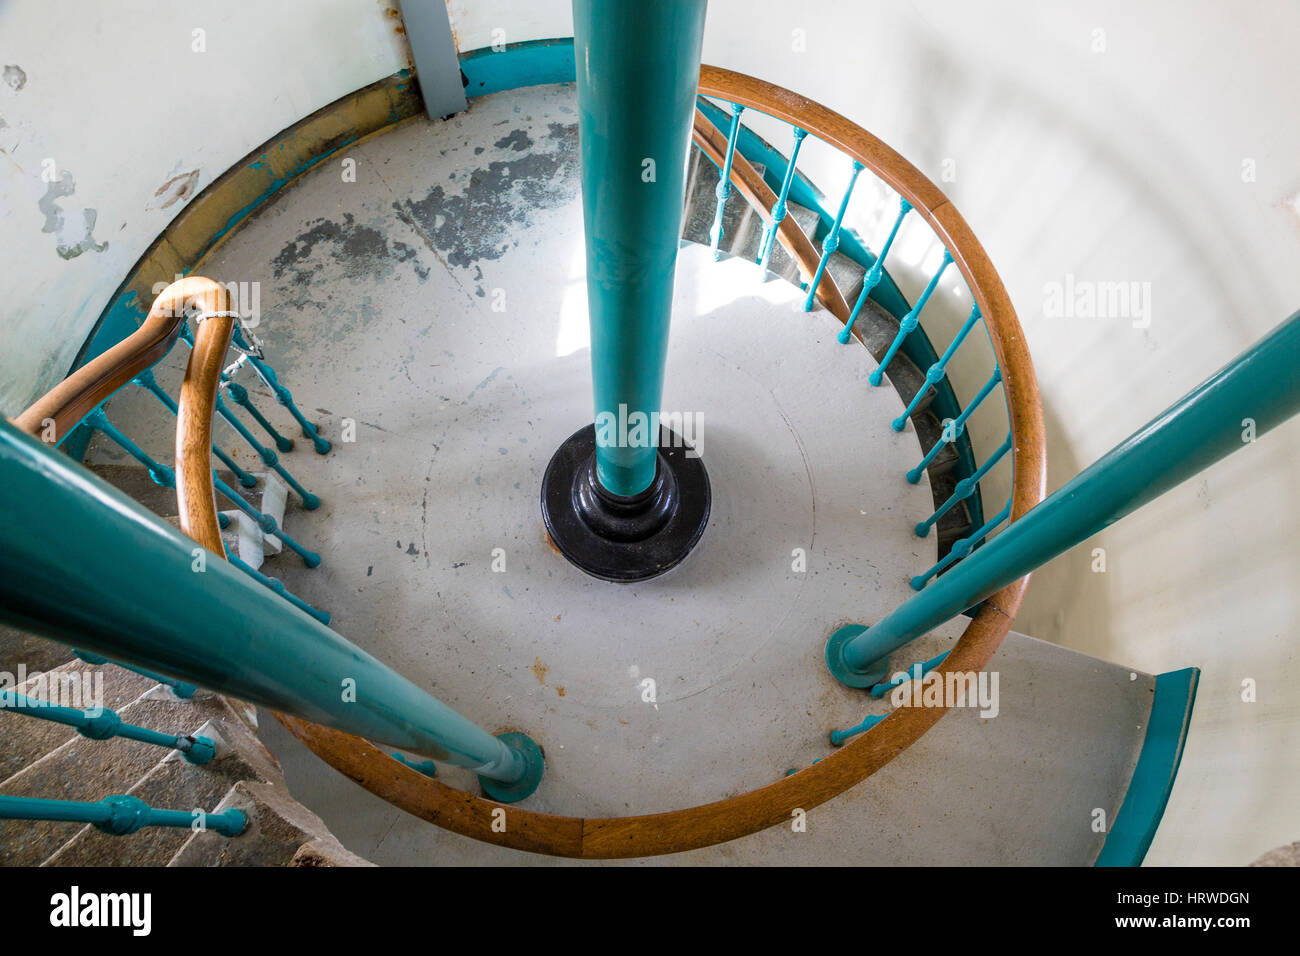 Spiral staircase with poles for gearing mechanism for lamp. Valentia Island lighthouse, County Kerry Ireland Stock Photo